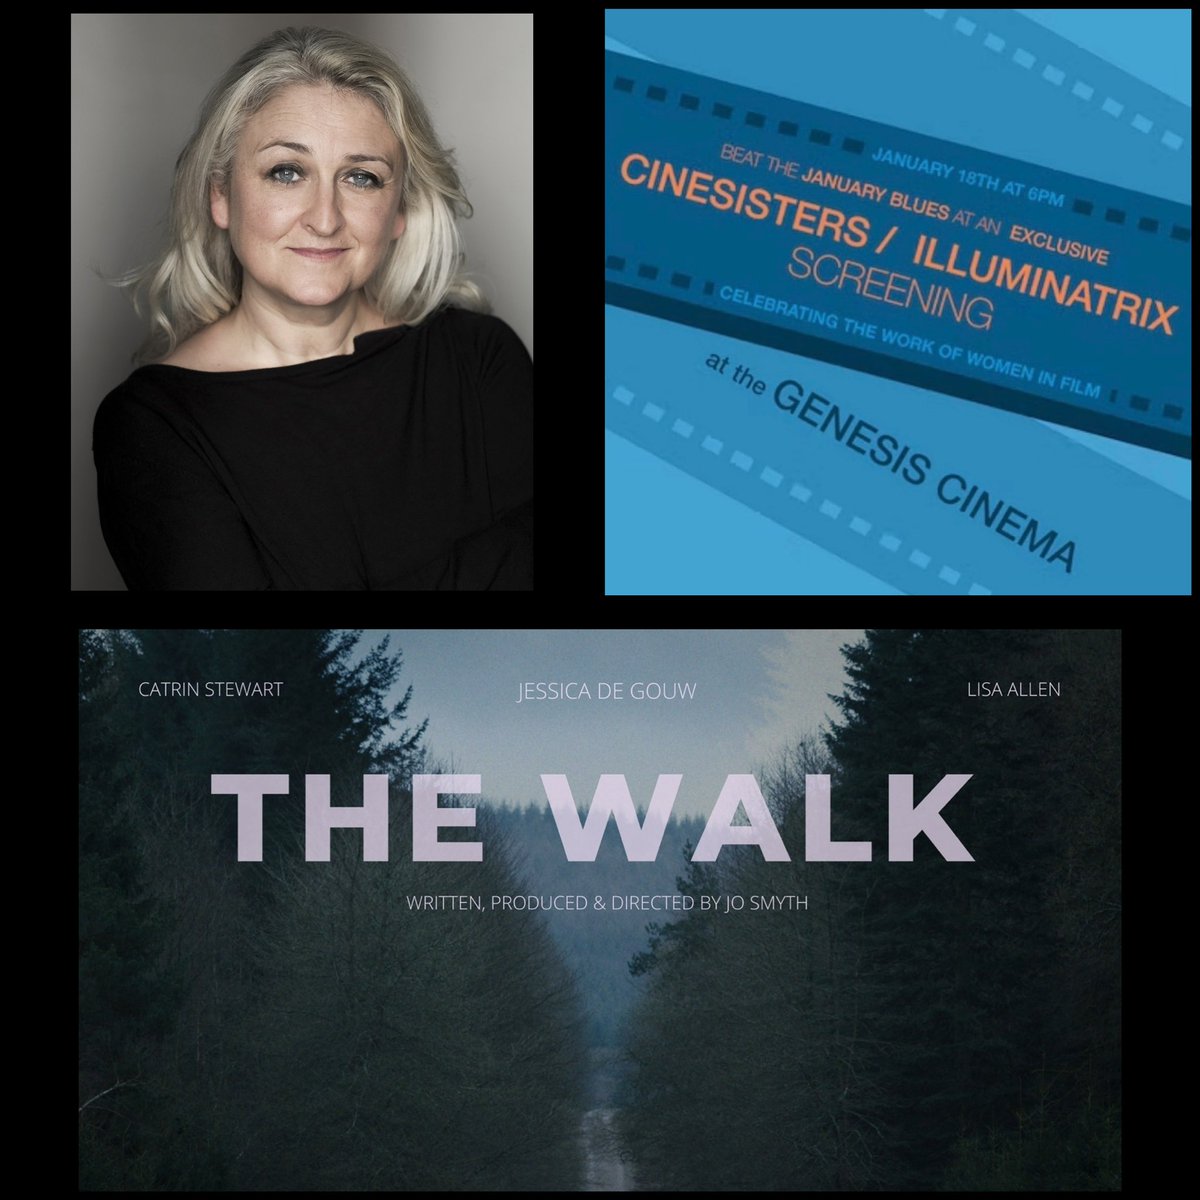 The @cinesisters and @illuminatrixLDN played host to a screening of the award winning film ‘The Walk’, featuring our client @LisaTheAllen, this week. A celebration evening of women in cinema @GenesisCinema More about Lisa here: northofwatford.com/actor-lisa-all…